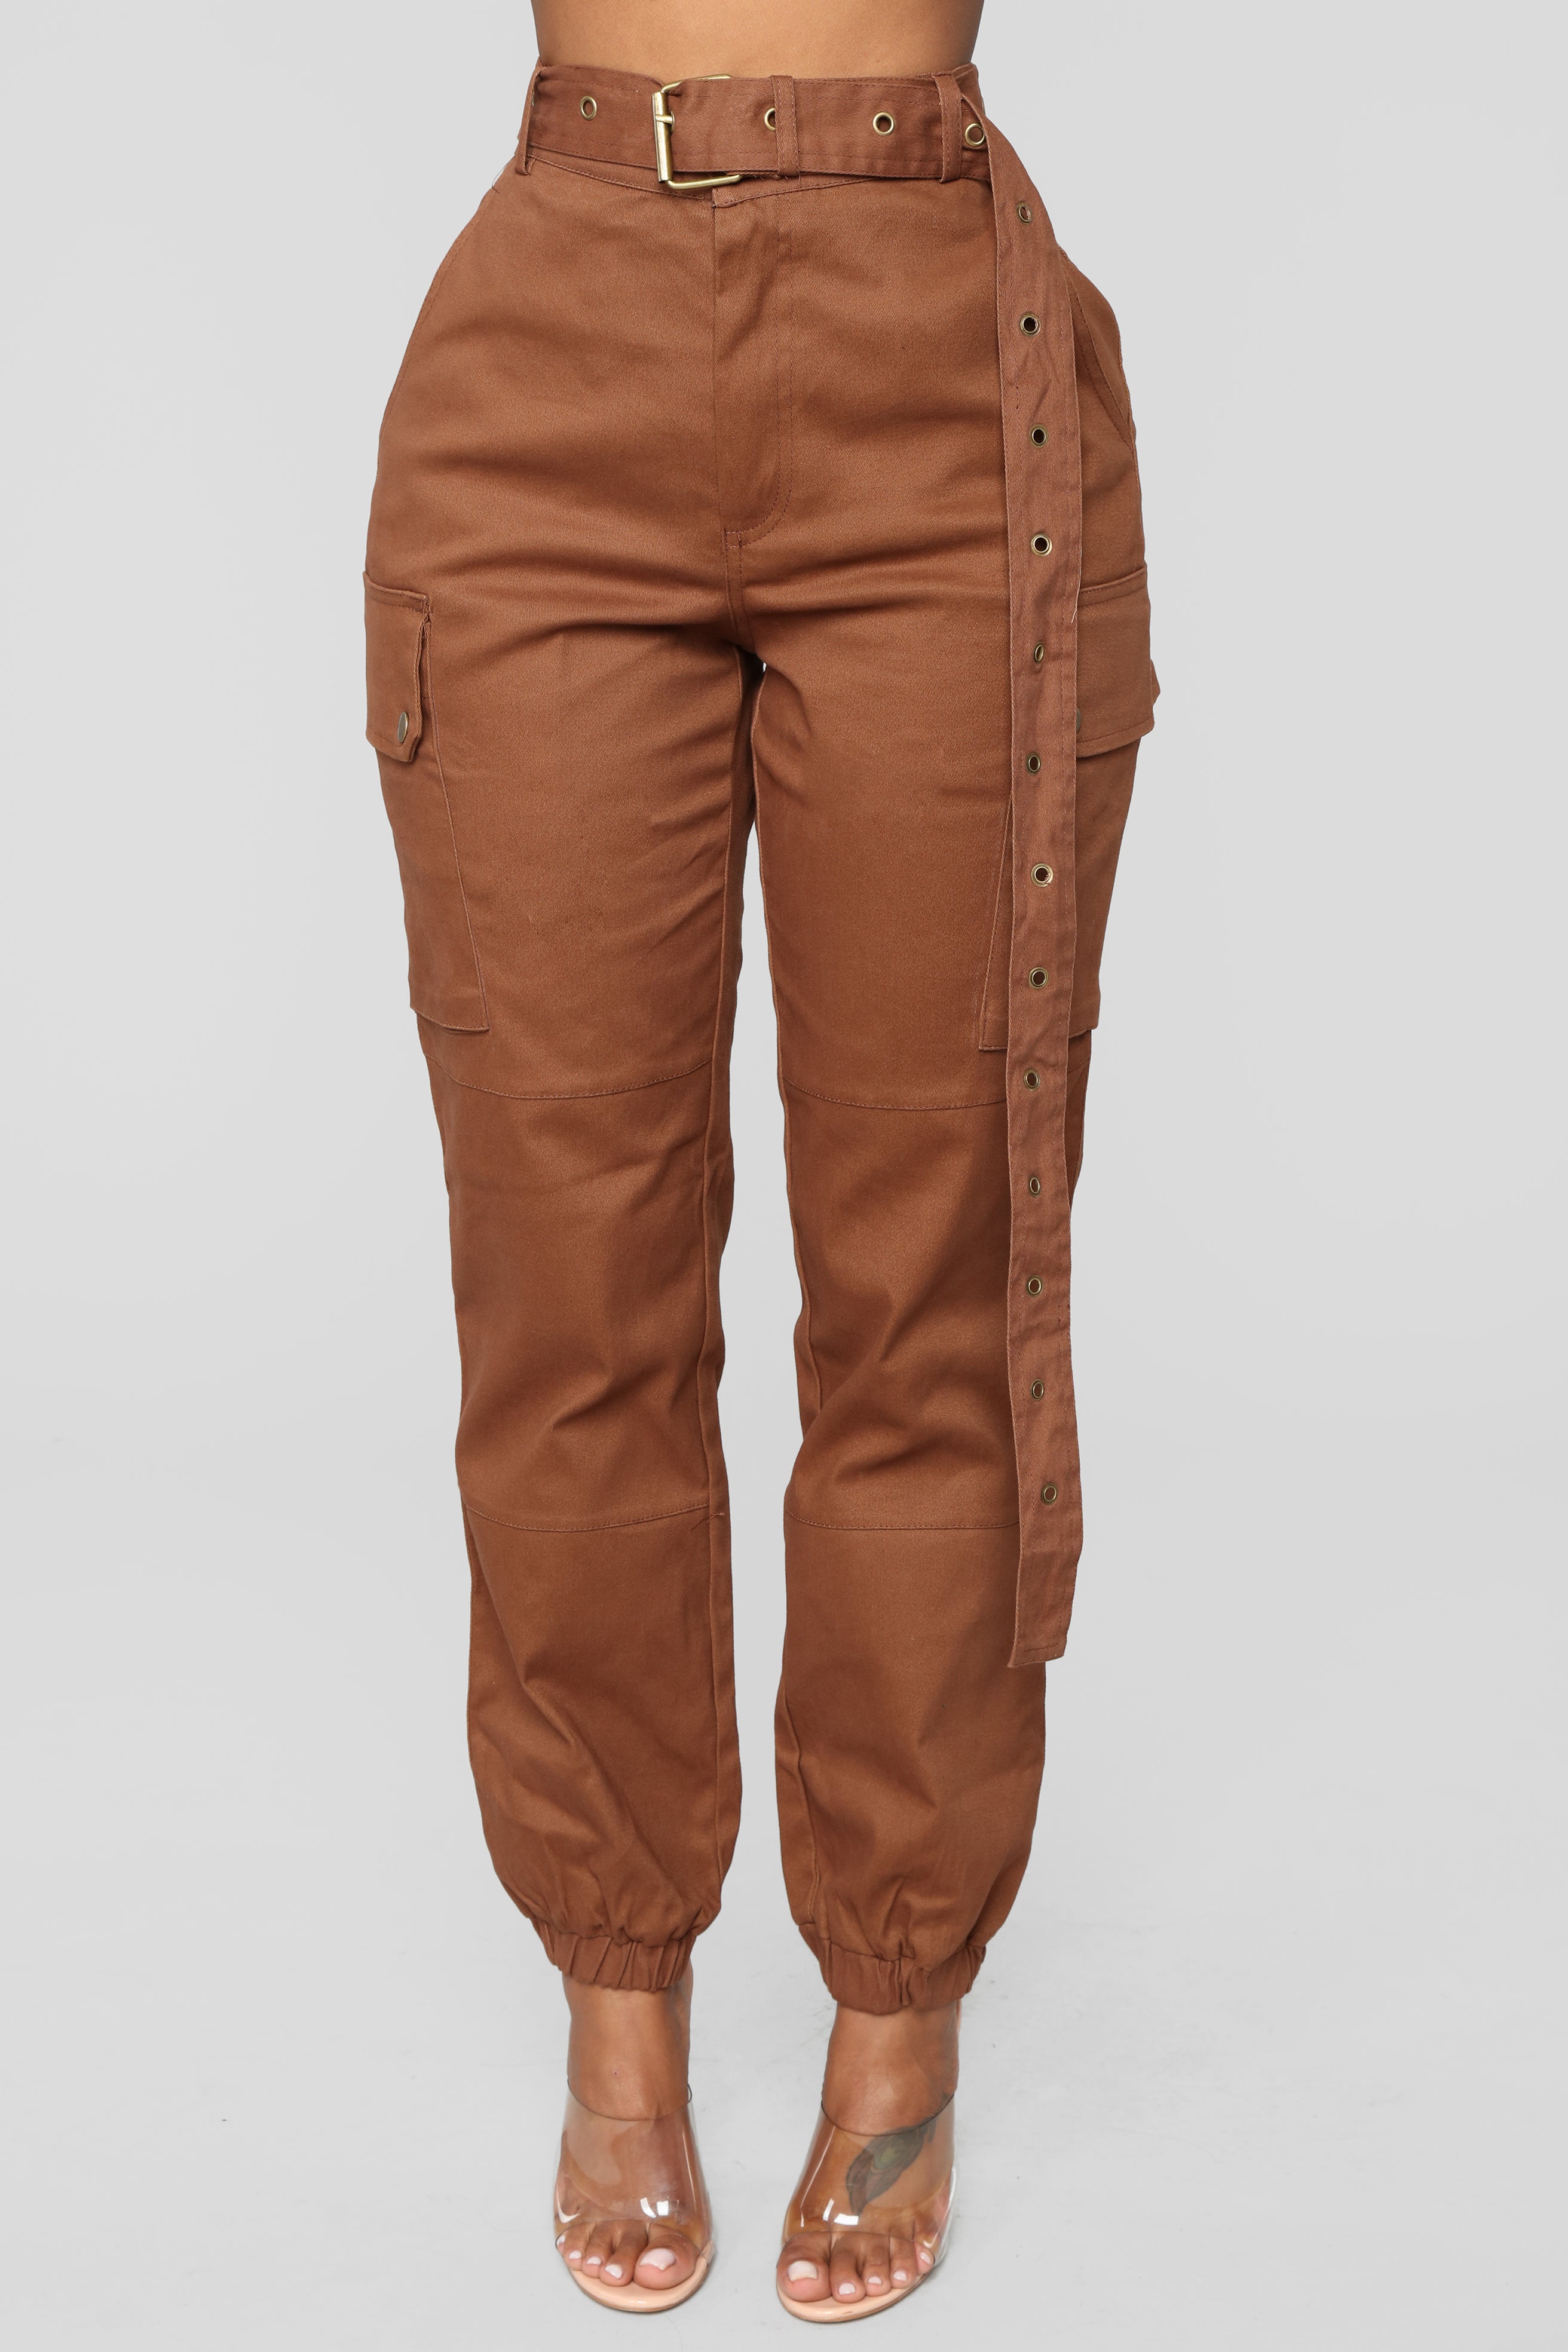 Cargo Chic Pants - Brown